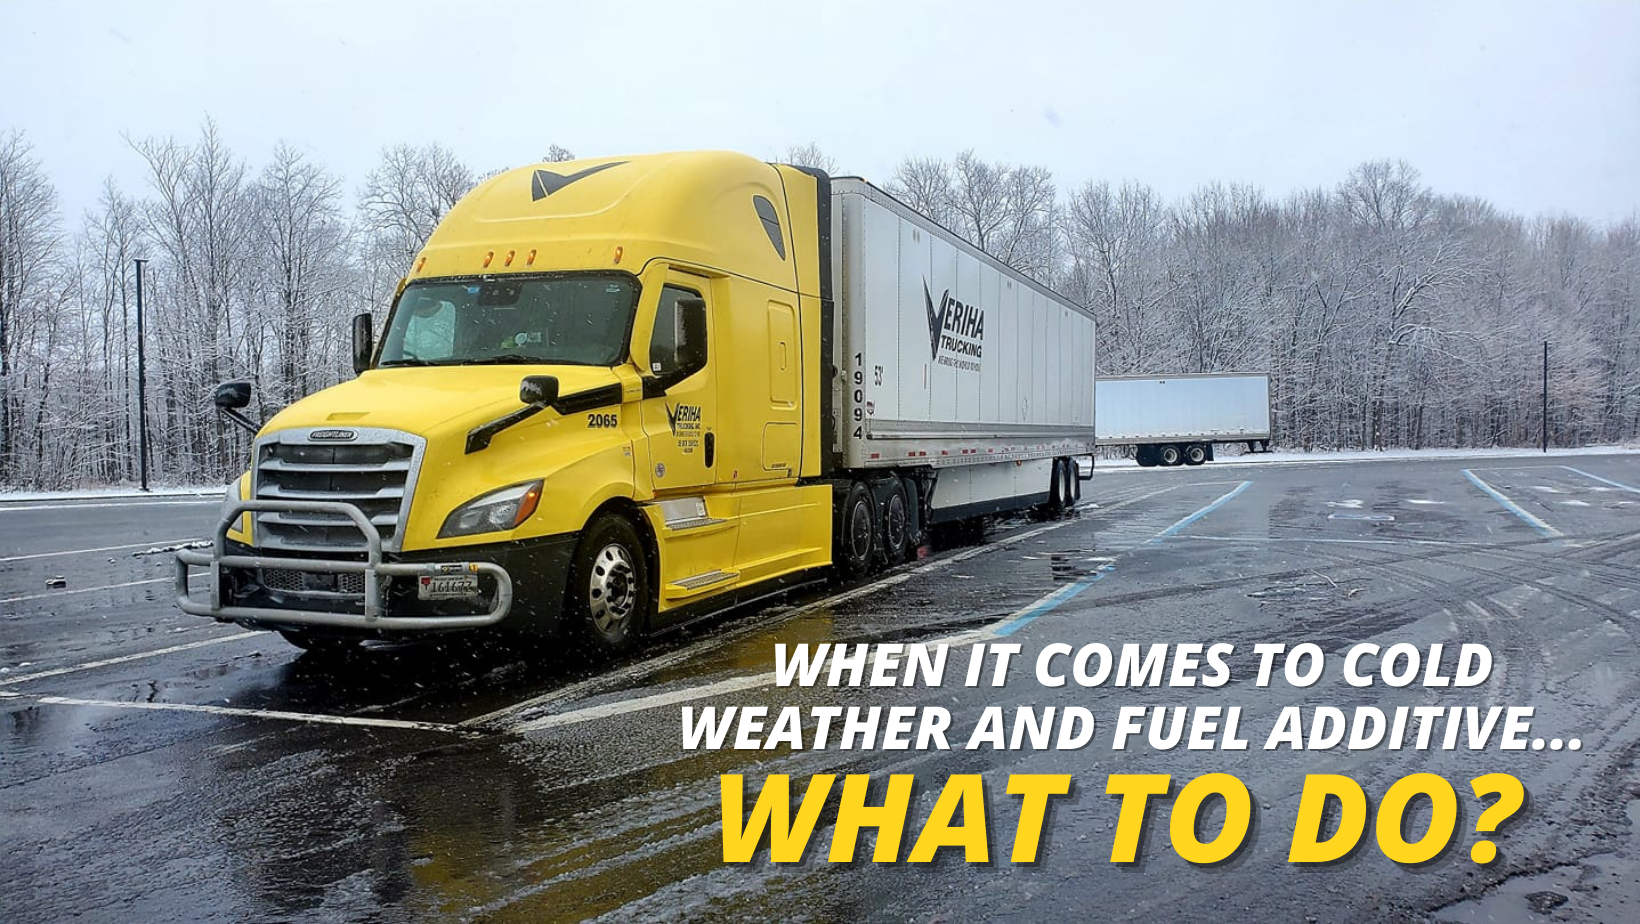 How to Avoid Gelled Fuel During Winter